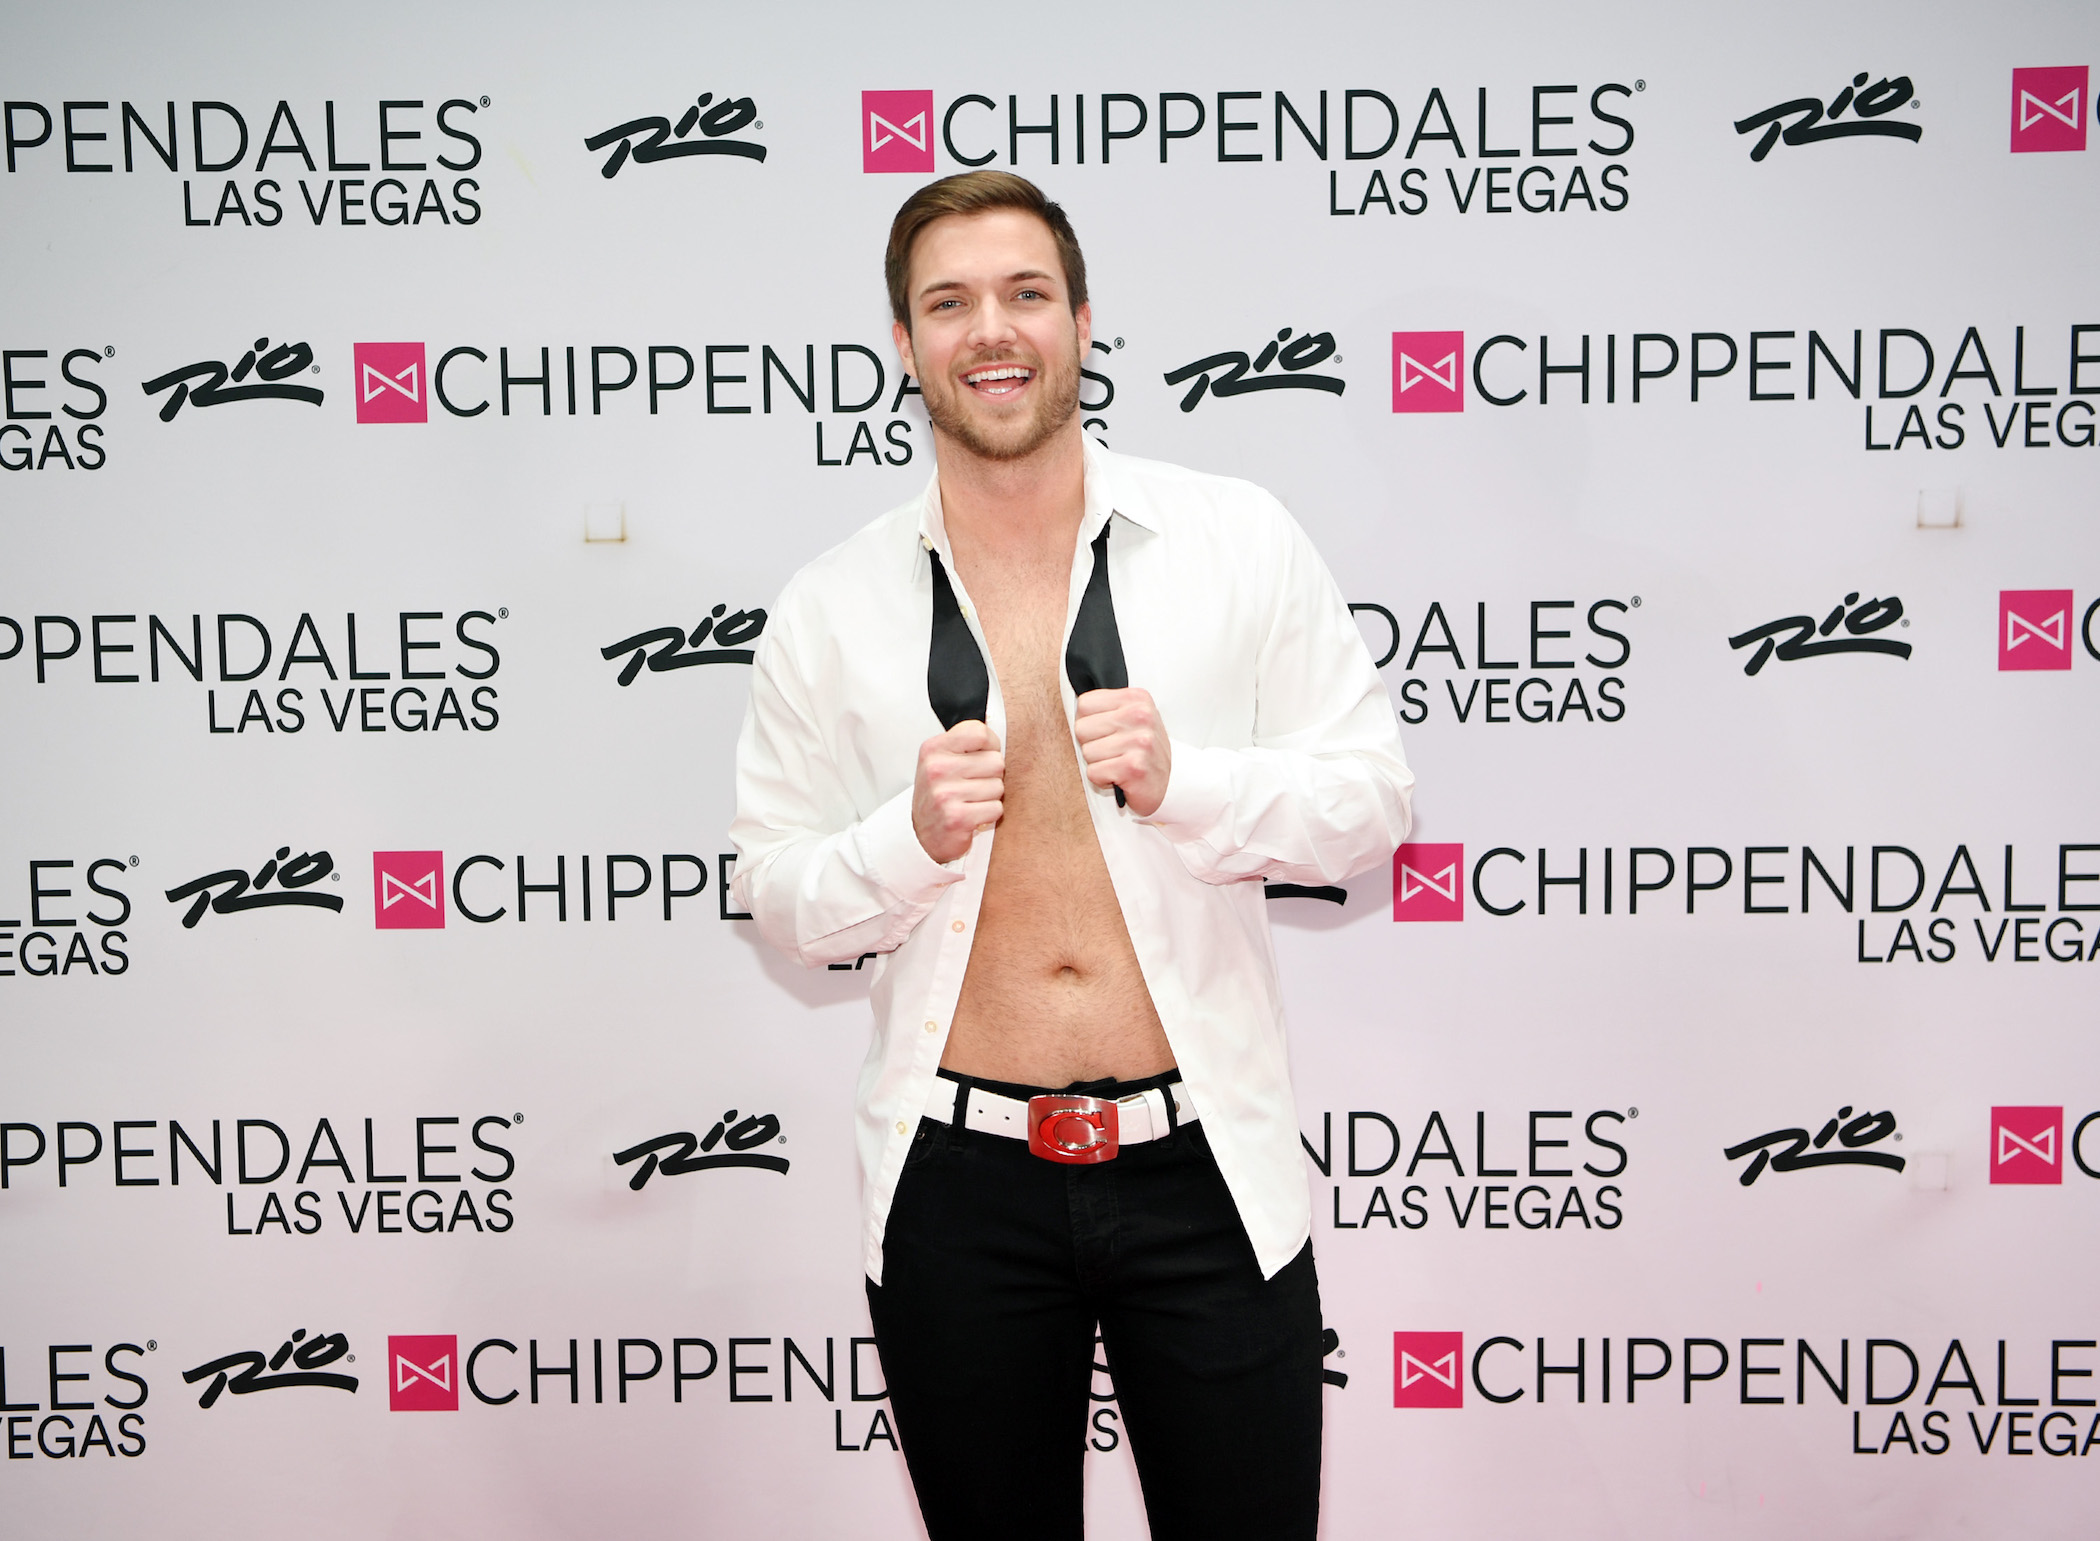 Jordan Kimball from 'Bachelor in Paradise' at a Chippendales event with his shirt unbuttoned